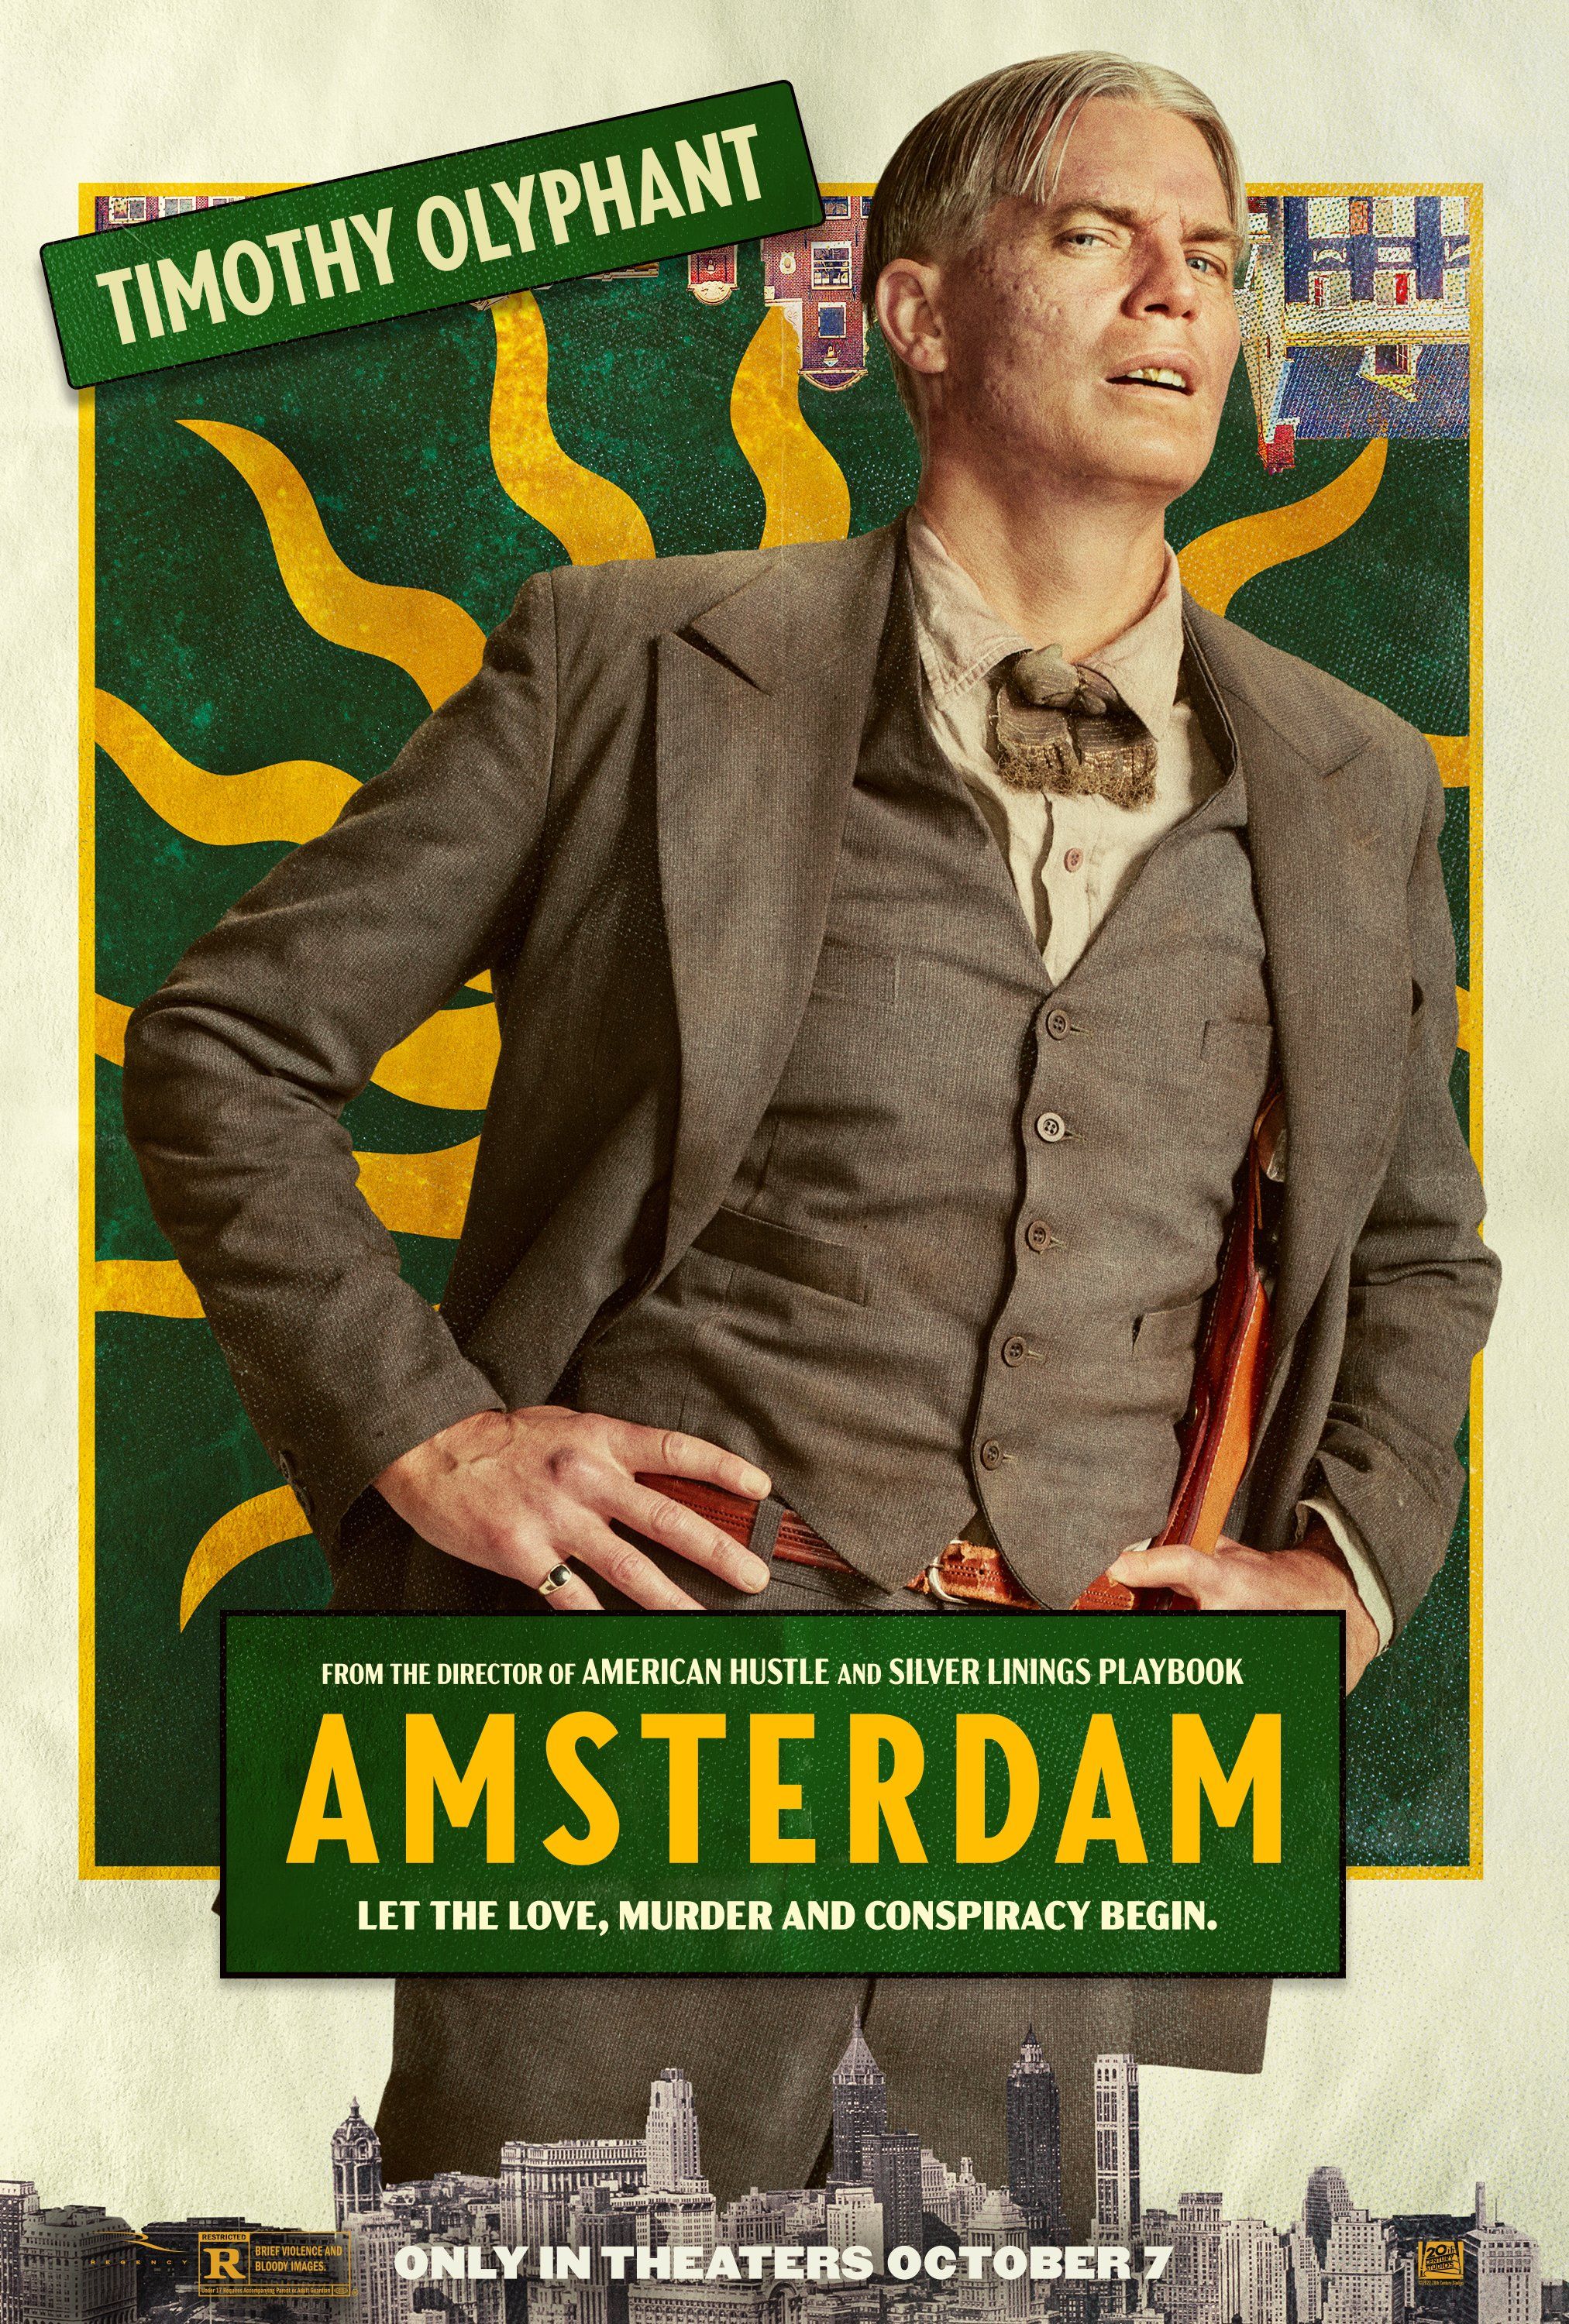 Timothy Olyphant in Amsterdam poster